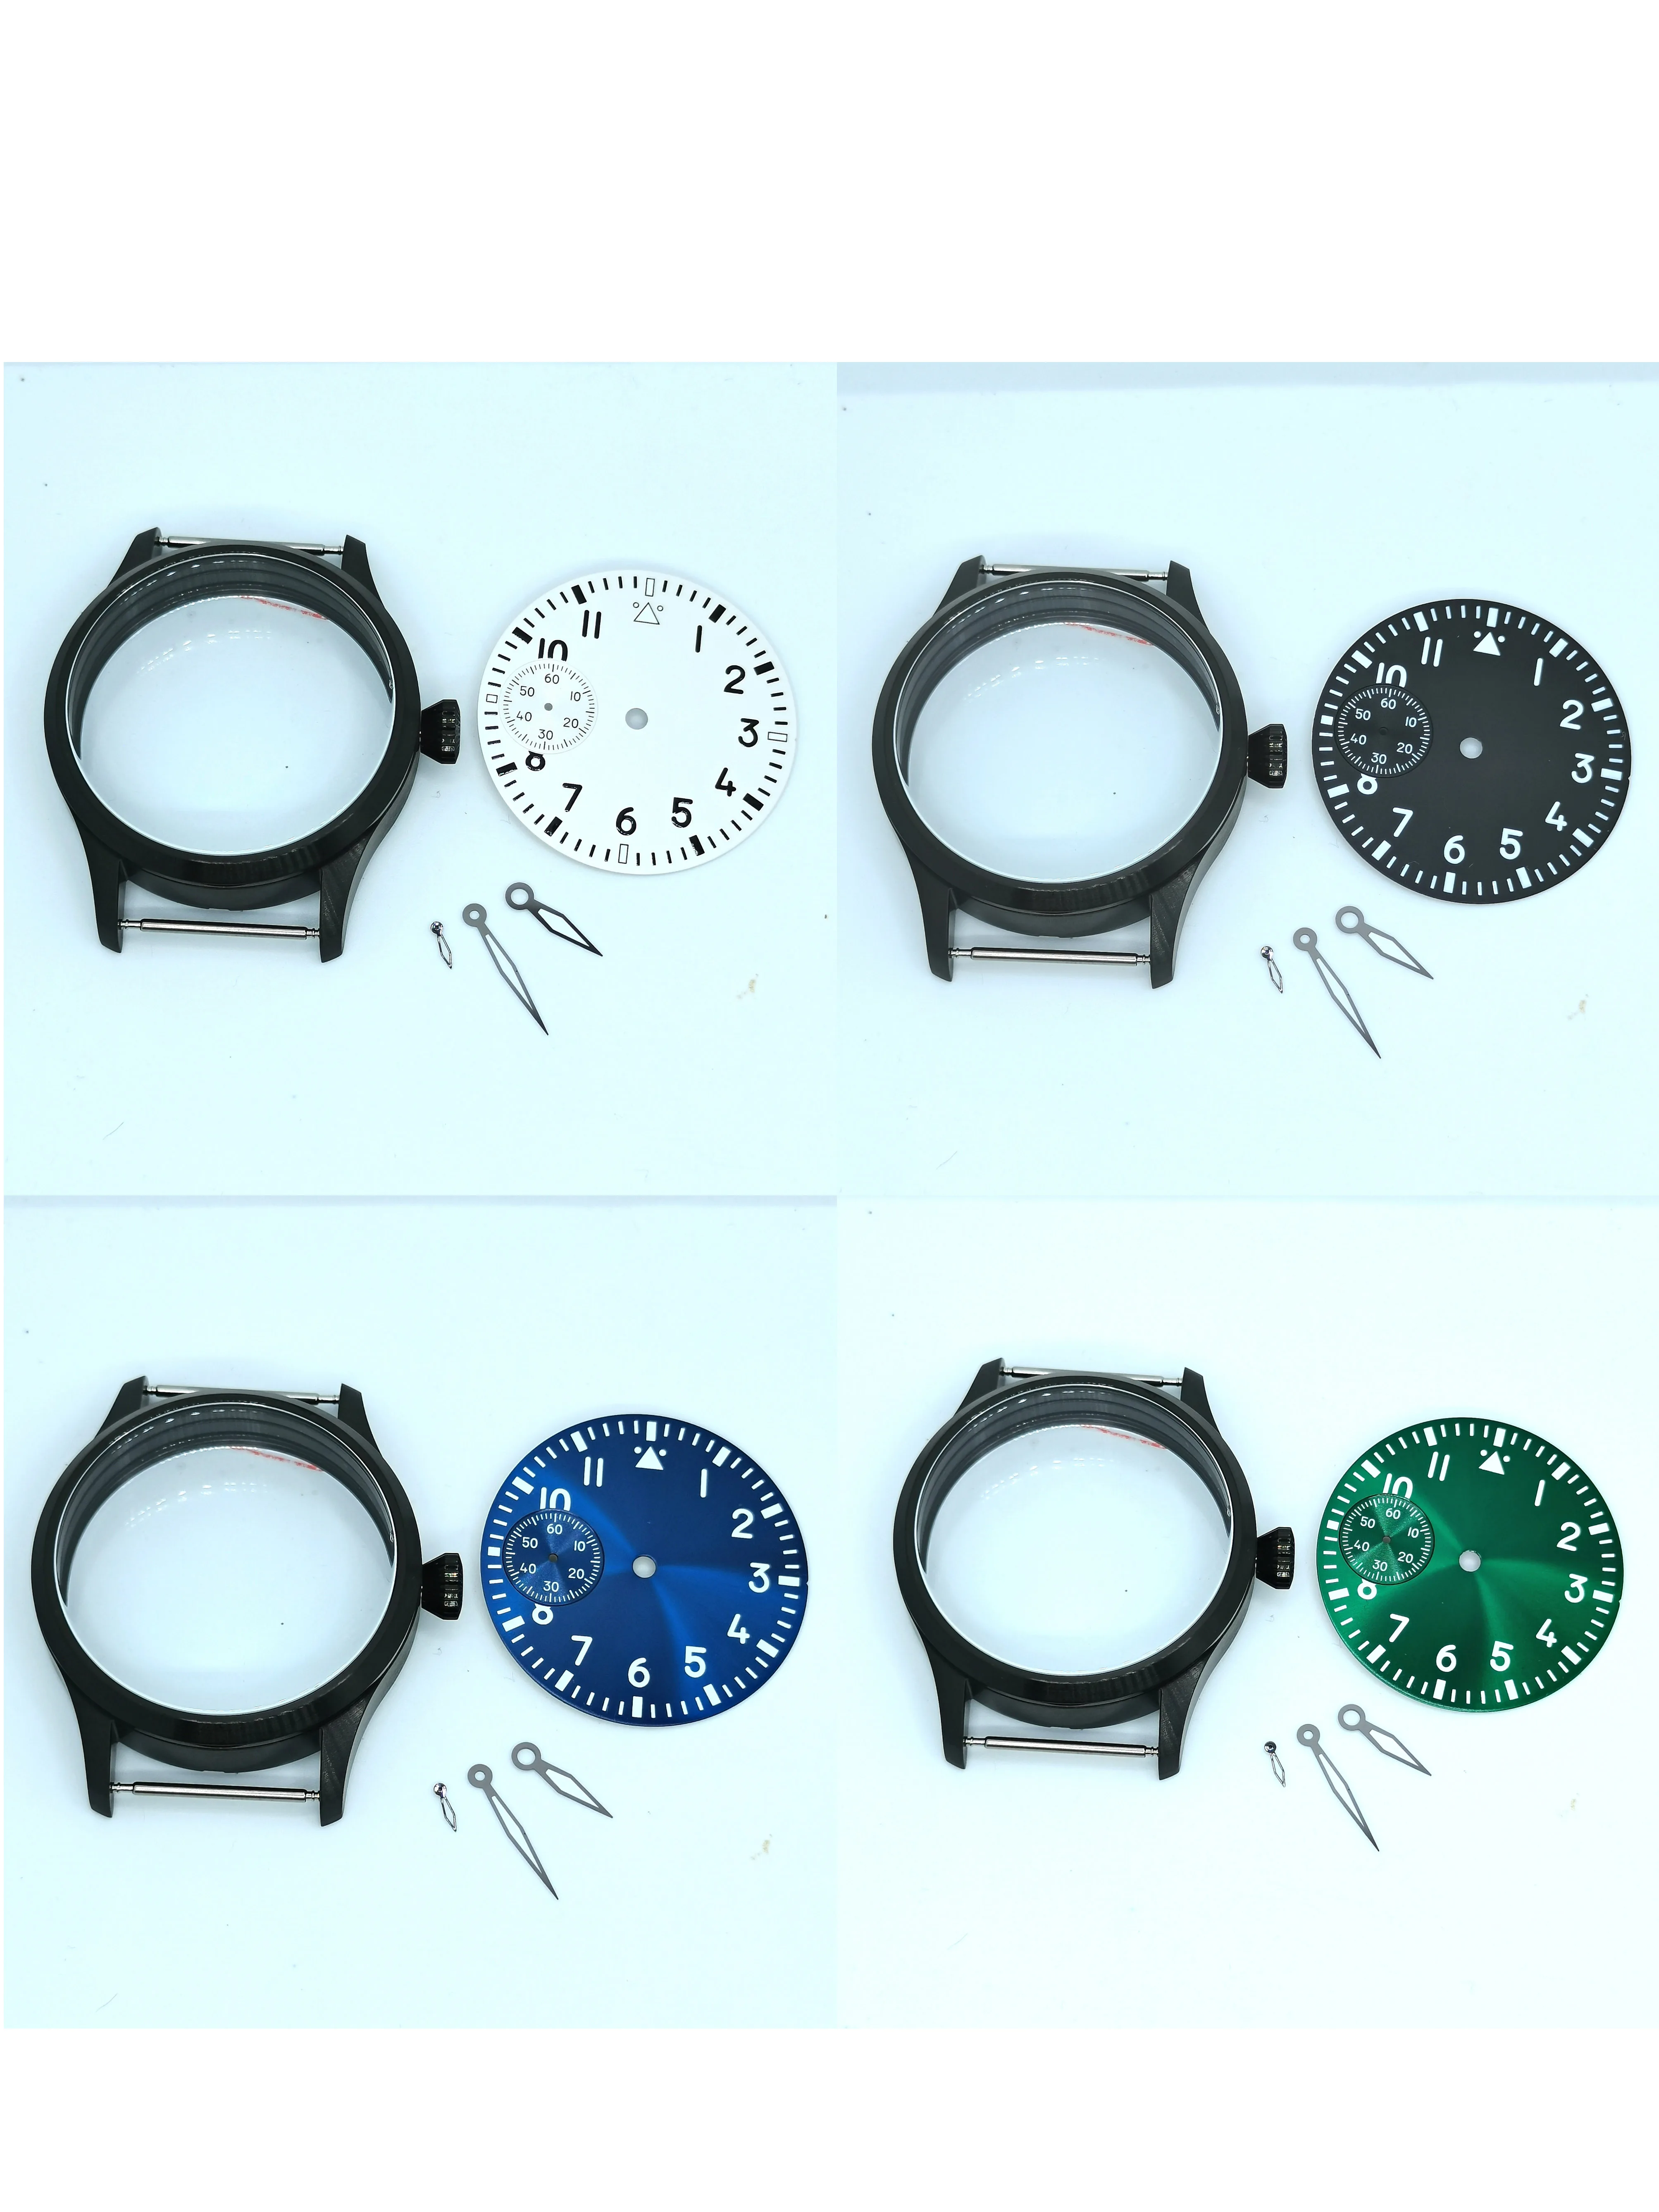 

New 42MM Watch Case Add Green Luminous Dial And Hands Fit St3600 Eta 6497 Manual Winding Movement